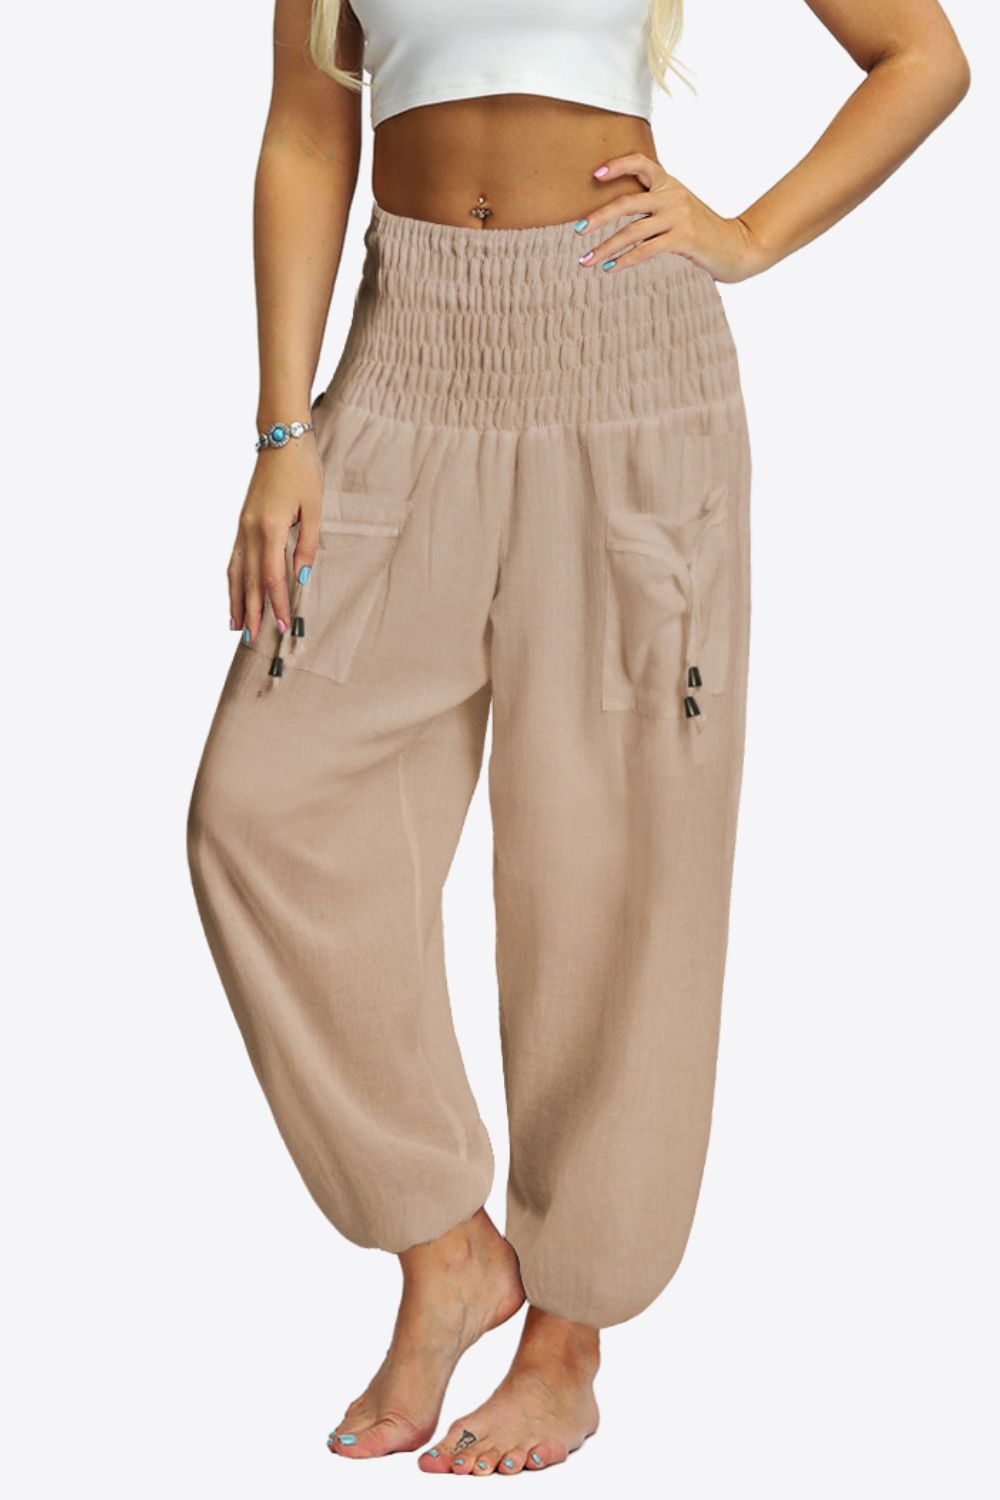 Smocked Long Joggers with Pockets - Light Brown / S - Bottoms - Pants - 10 - 2024